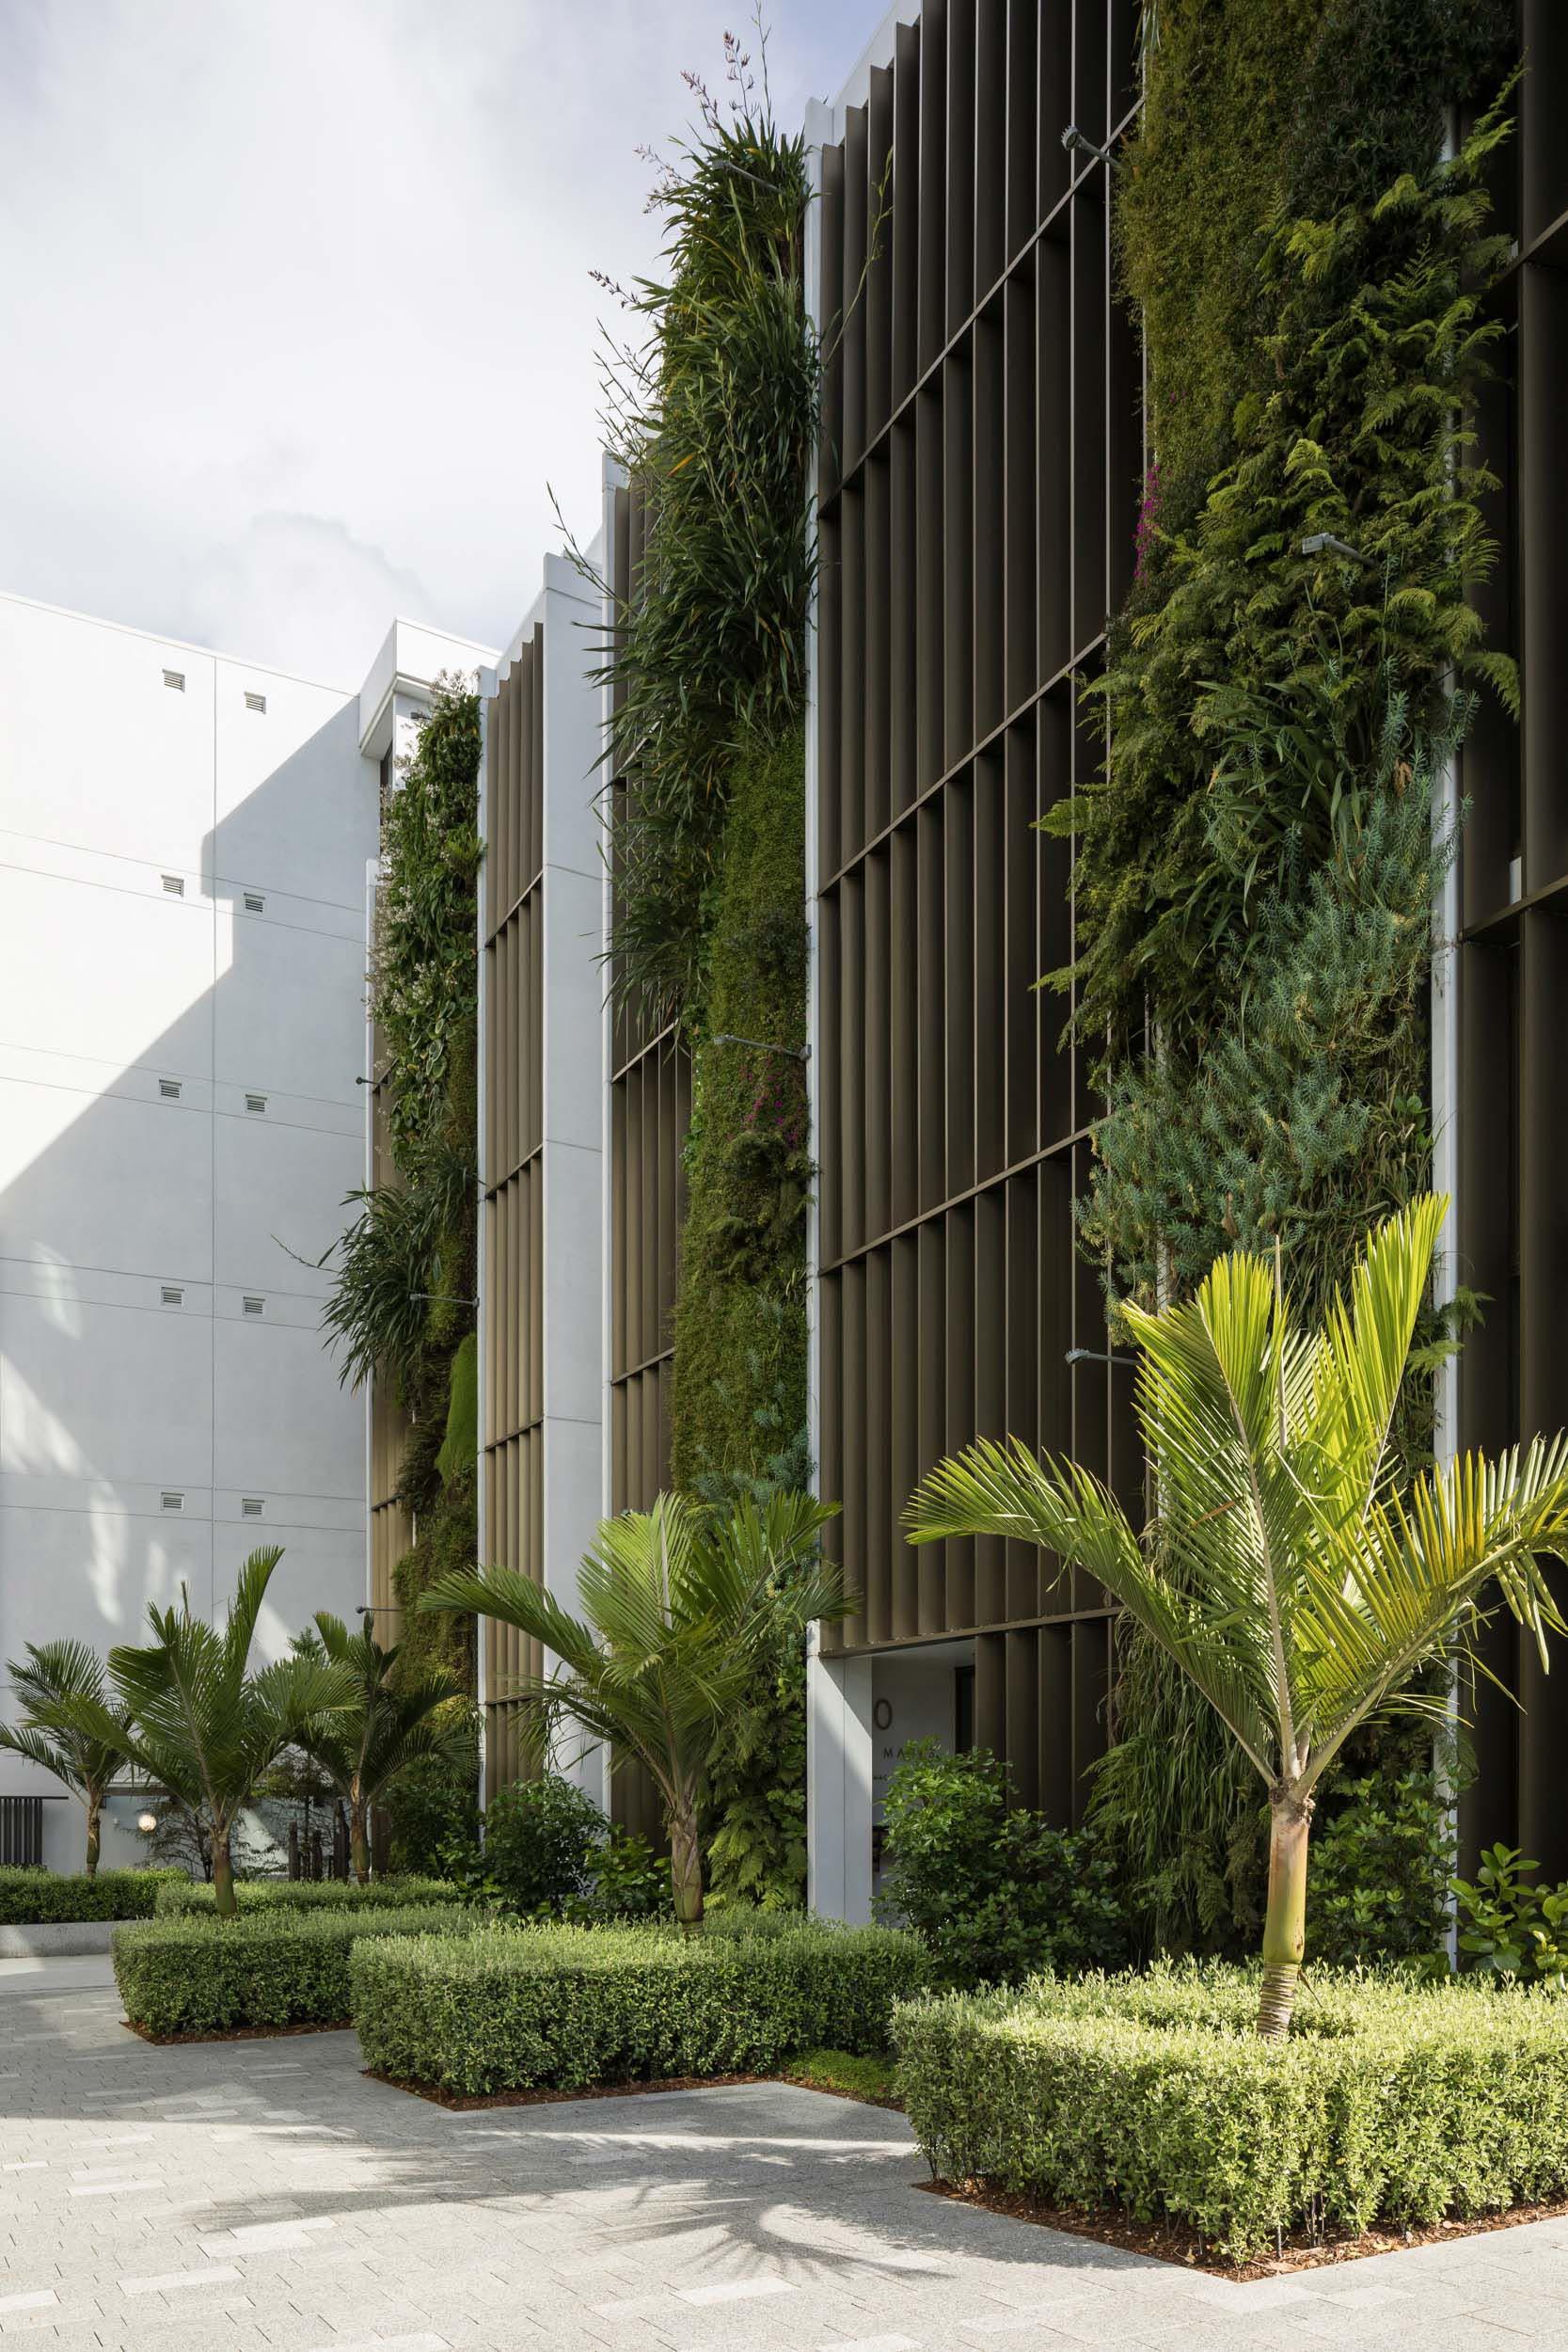 An apartment building with vertical gardens on the side of the building